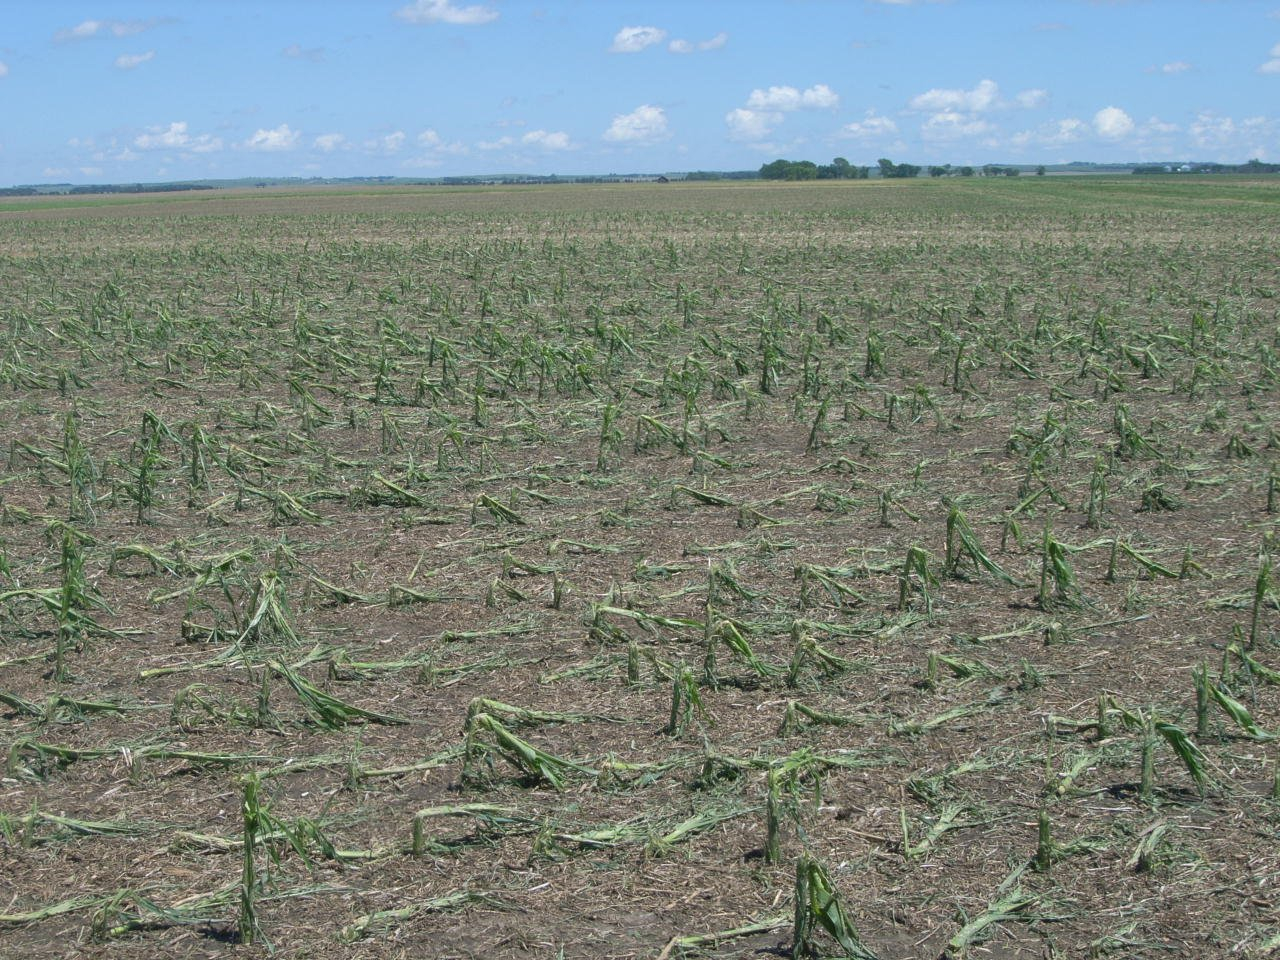 Hail damage to corn crop from storm of June 24